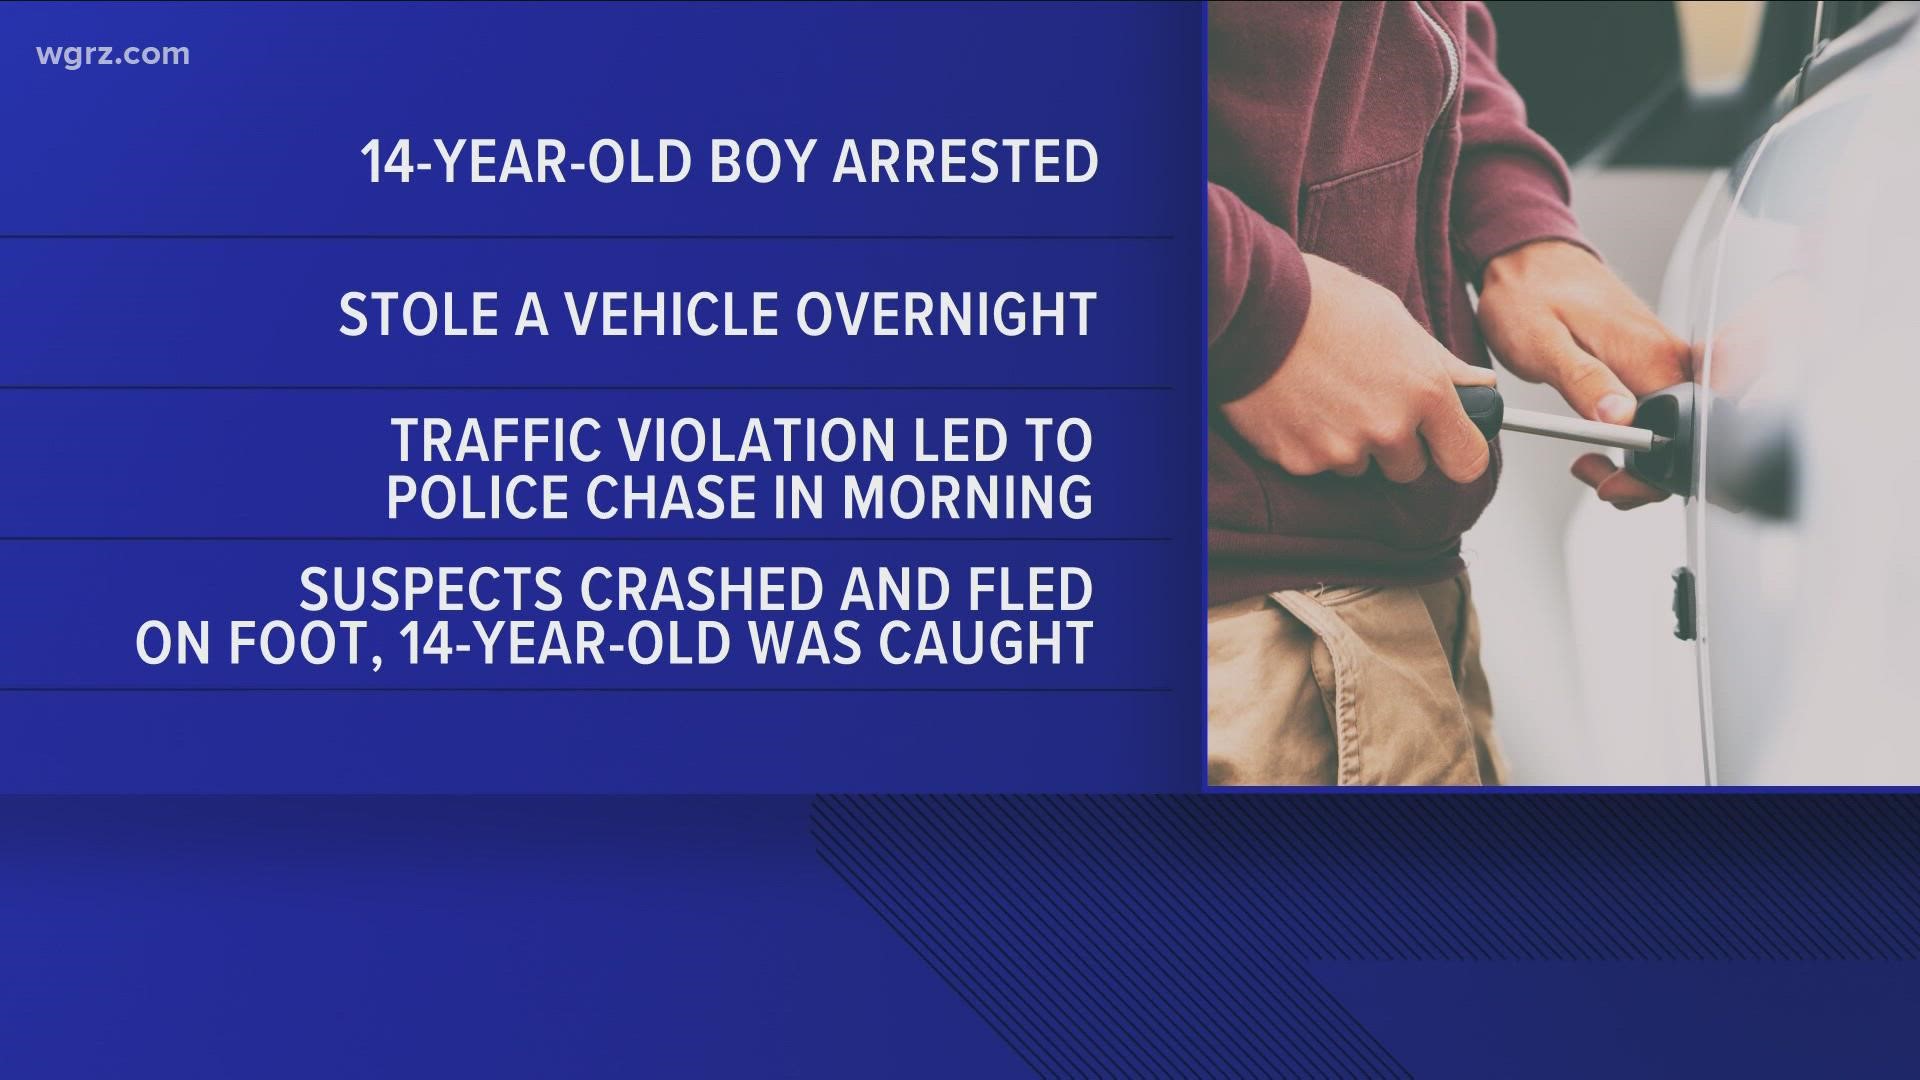 A 14-year-old boy from Buffalo has been arrested and charged with stealing a vehicle in the Niagara County Town of Wheatfield overnight.